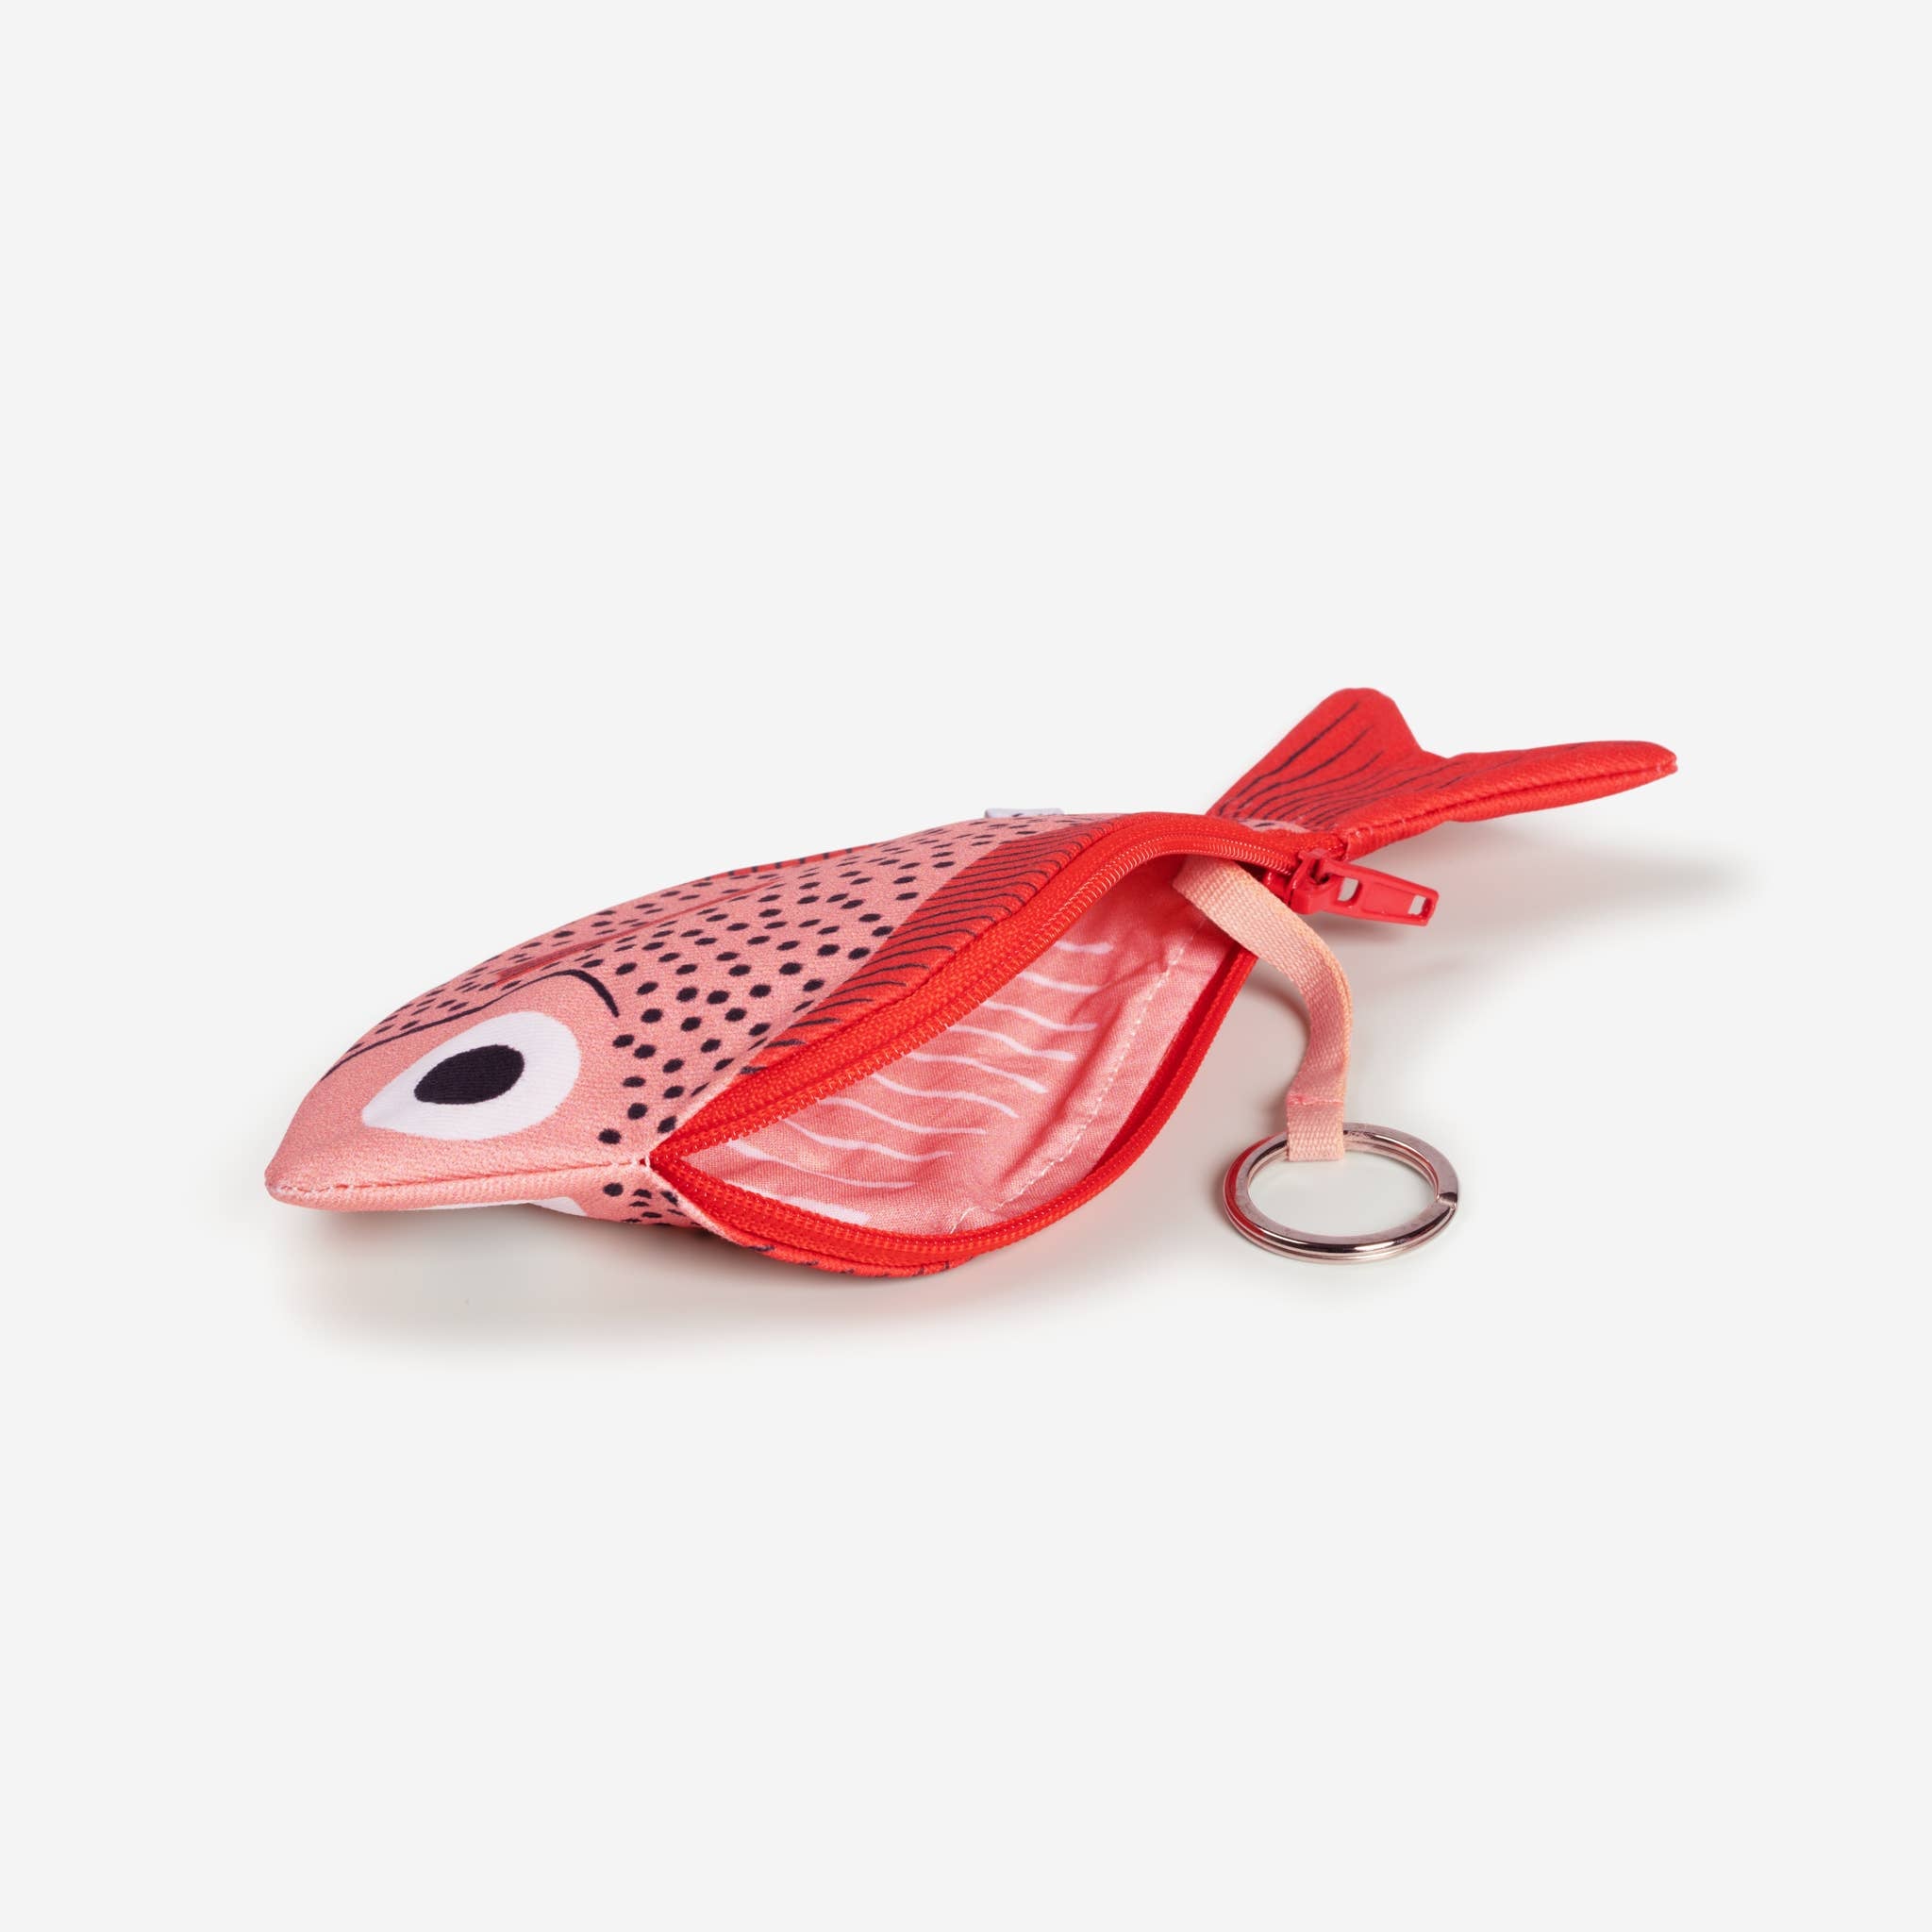 Pink Sweeper Fish purse with keychain - waterproof